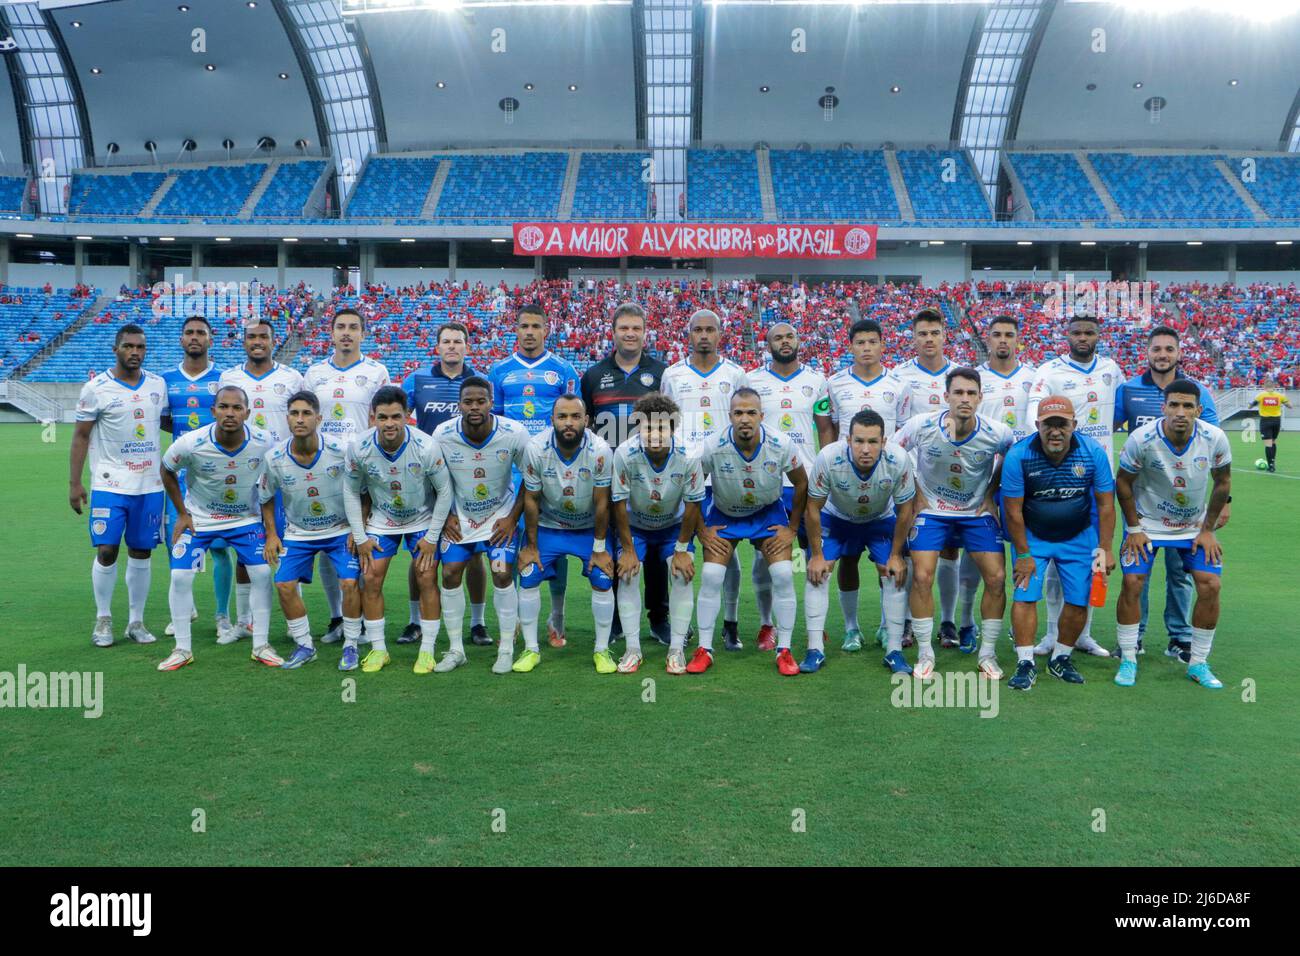 RN - Natal - 04/30/2022 - BRAZILIAN SERIE D 2022, AMERICA X AFOGADOS - Afogados players pose for a photo before the match against America-RN at the Arena das Dunas stadium for the Brazilian championship D 2022. Photo: Augusto Ratis/AGIF/Sipa USA Stock Photo